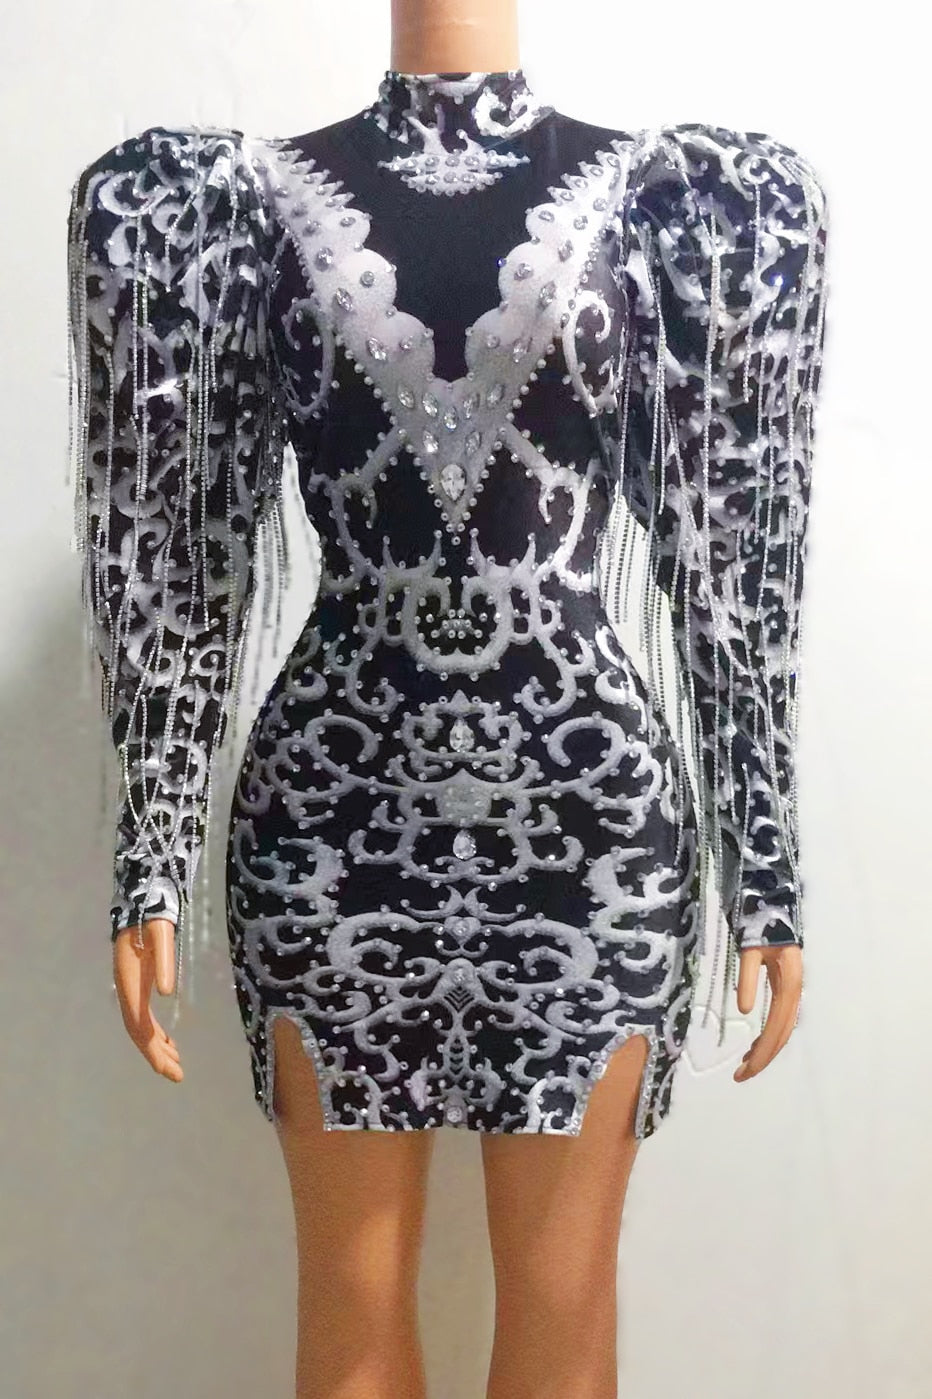 Sexy Black White Rhinestones Big Sleeves Dress Outfit Party Costume Evening Celebrate Chains Fringes Dress  Dancer